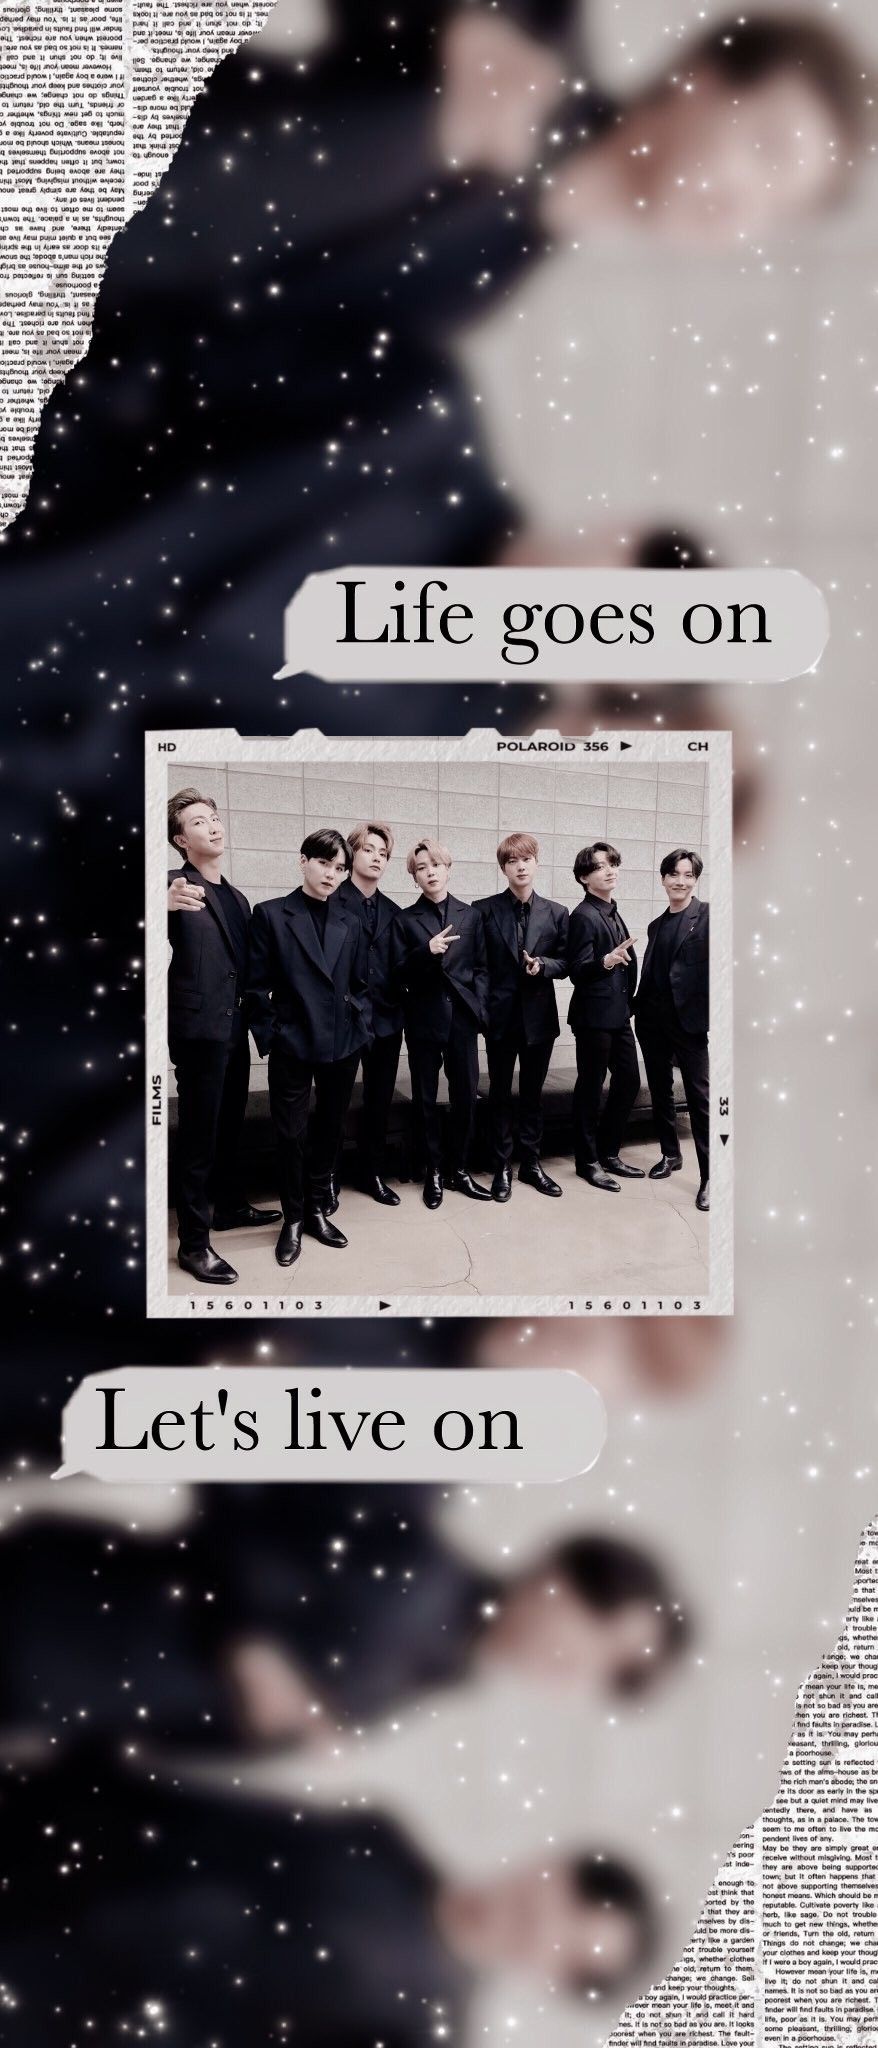 Wallpaper Life Goes On Bts Aesthetic Daily Quotes Free download bts wallpaper hd bts aesthetic wallpaper for laptop. wallpaper life goes on bts aesthetic